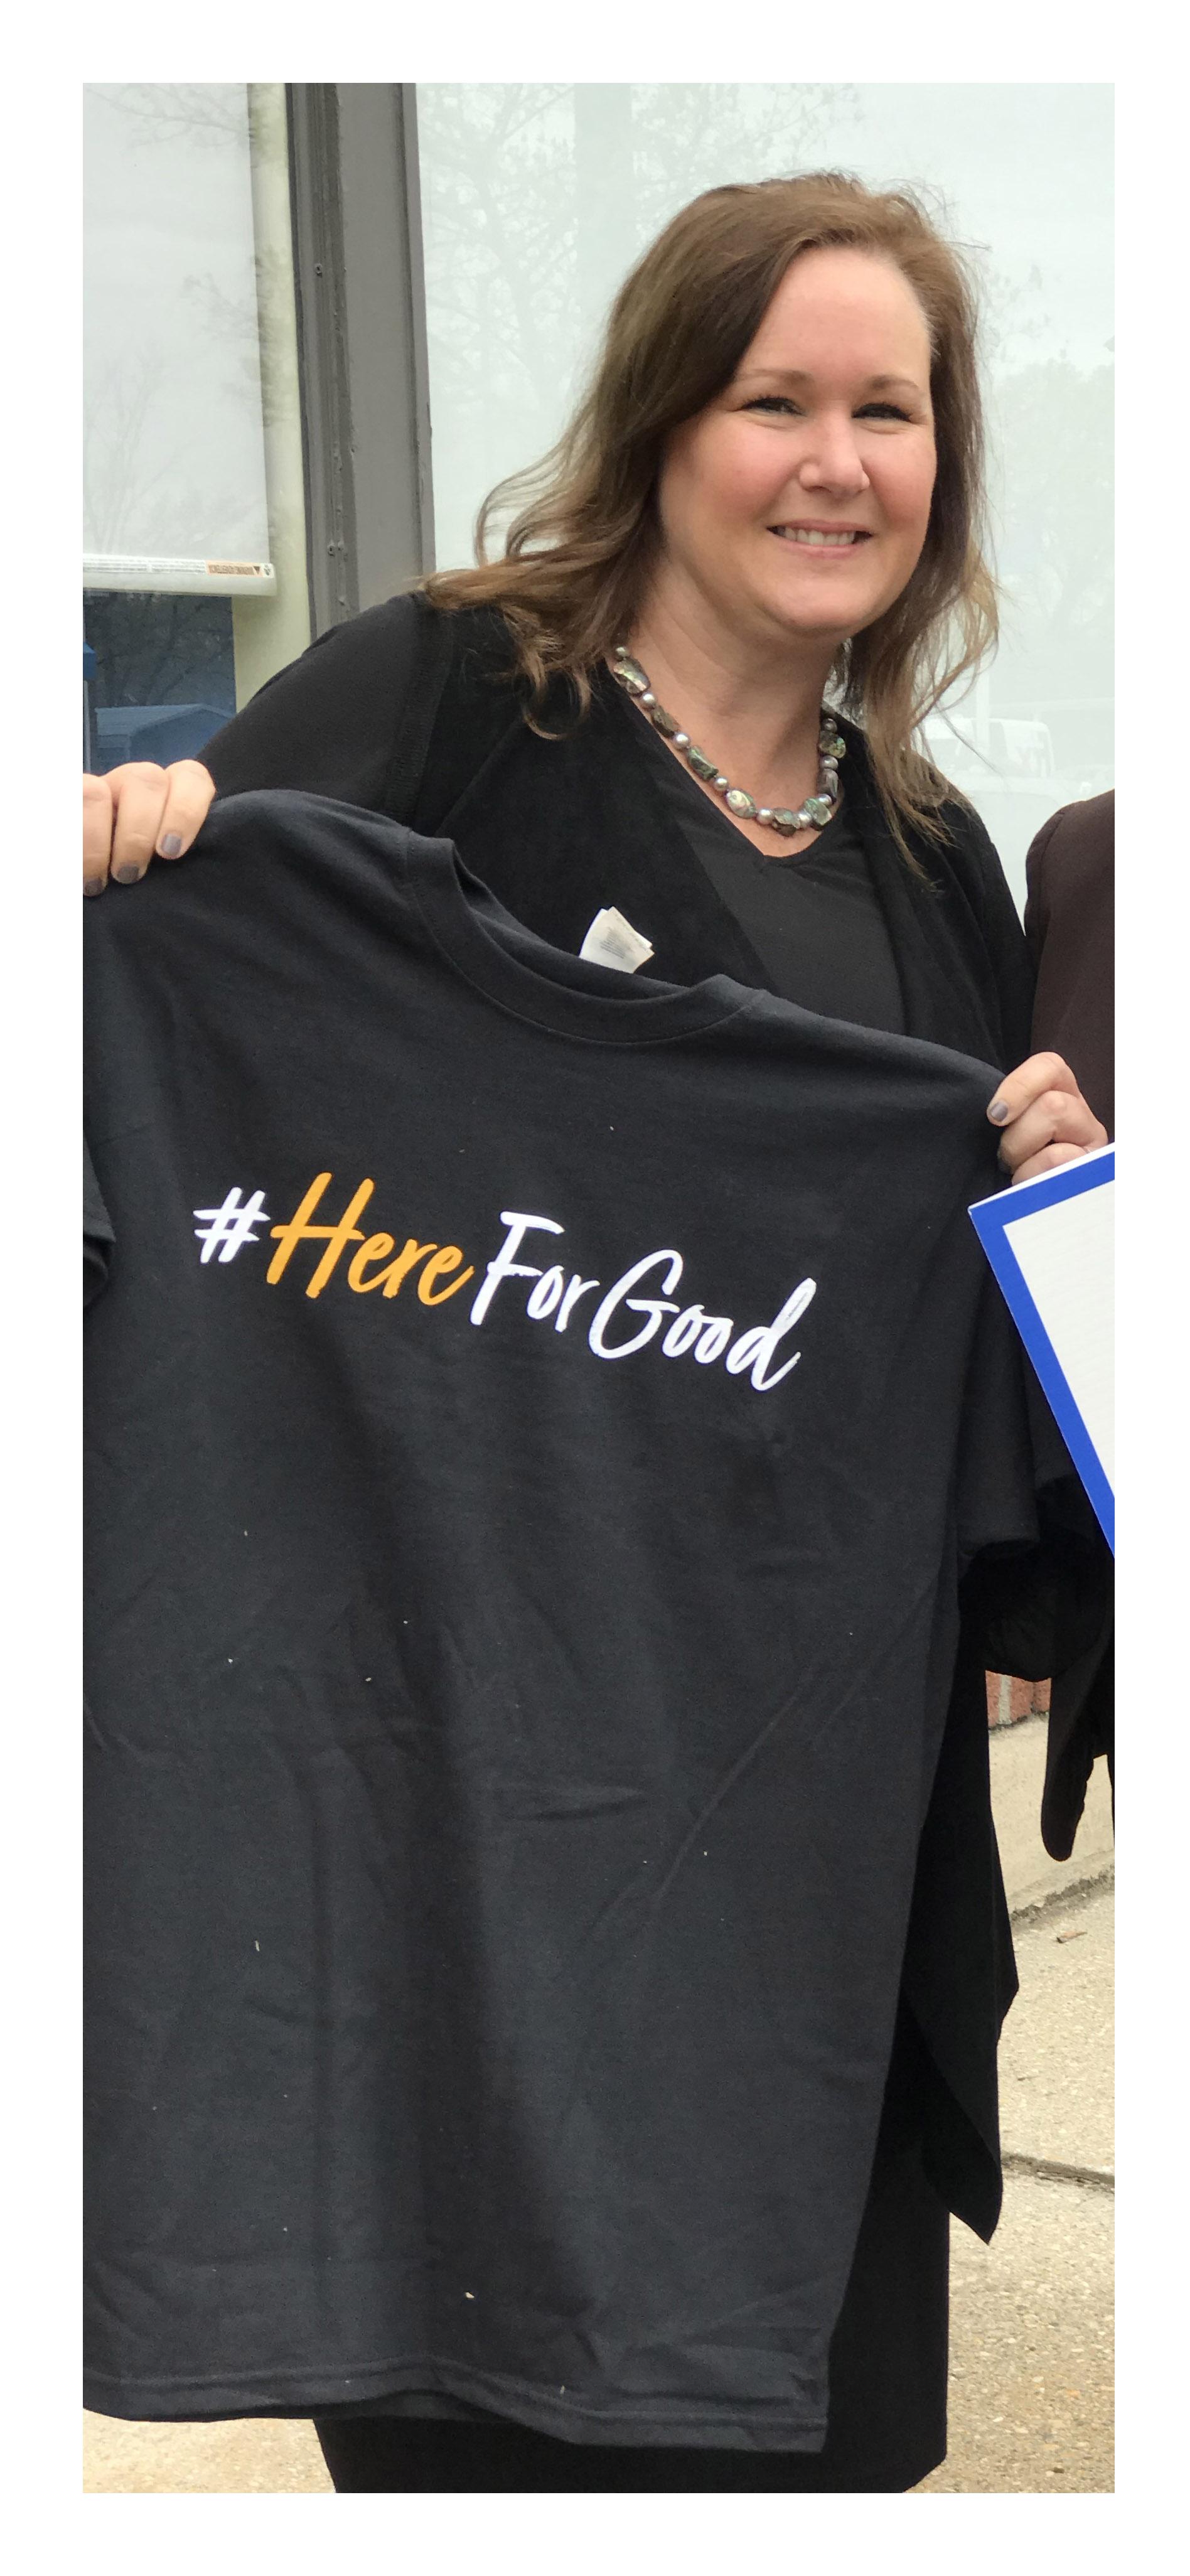 Berkshire United Way CEO holds t-shirt